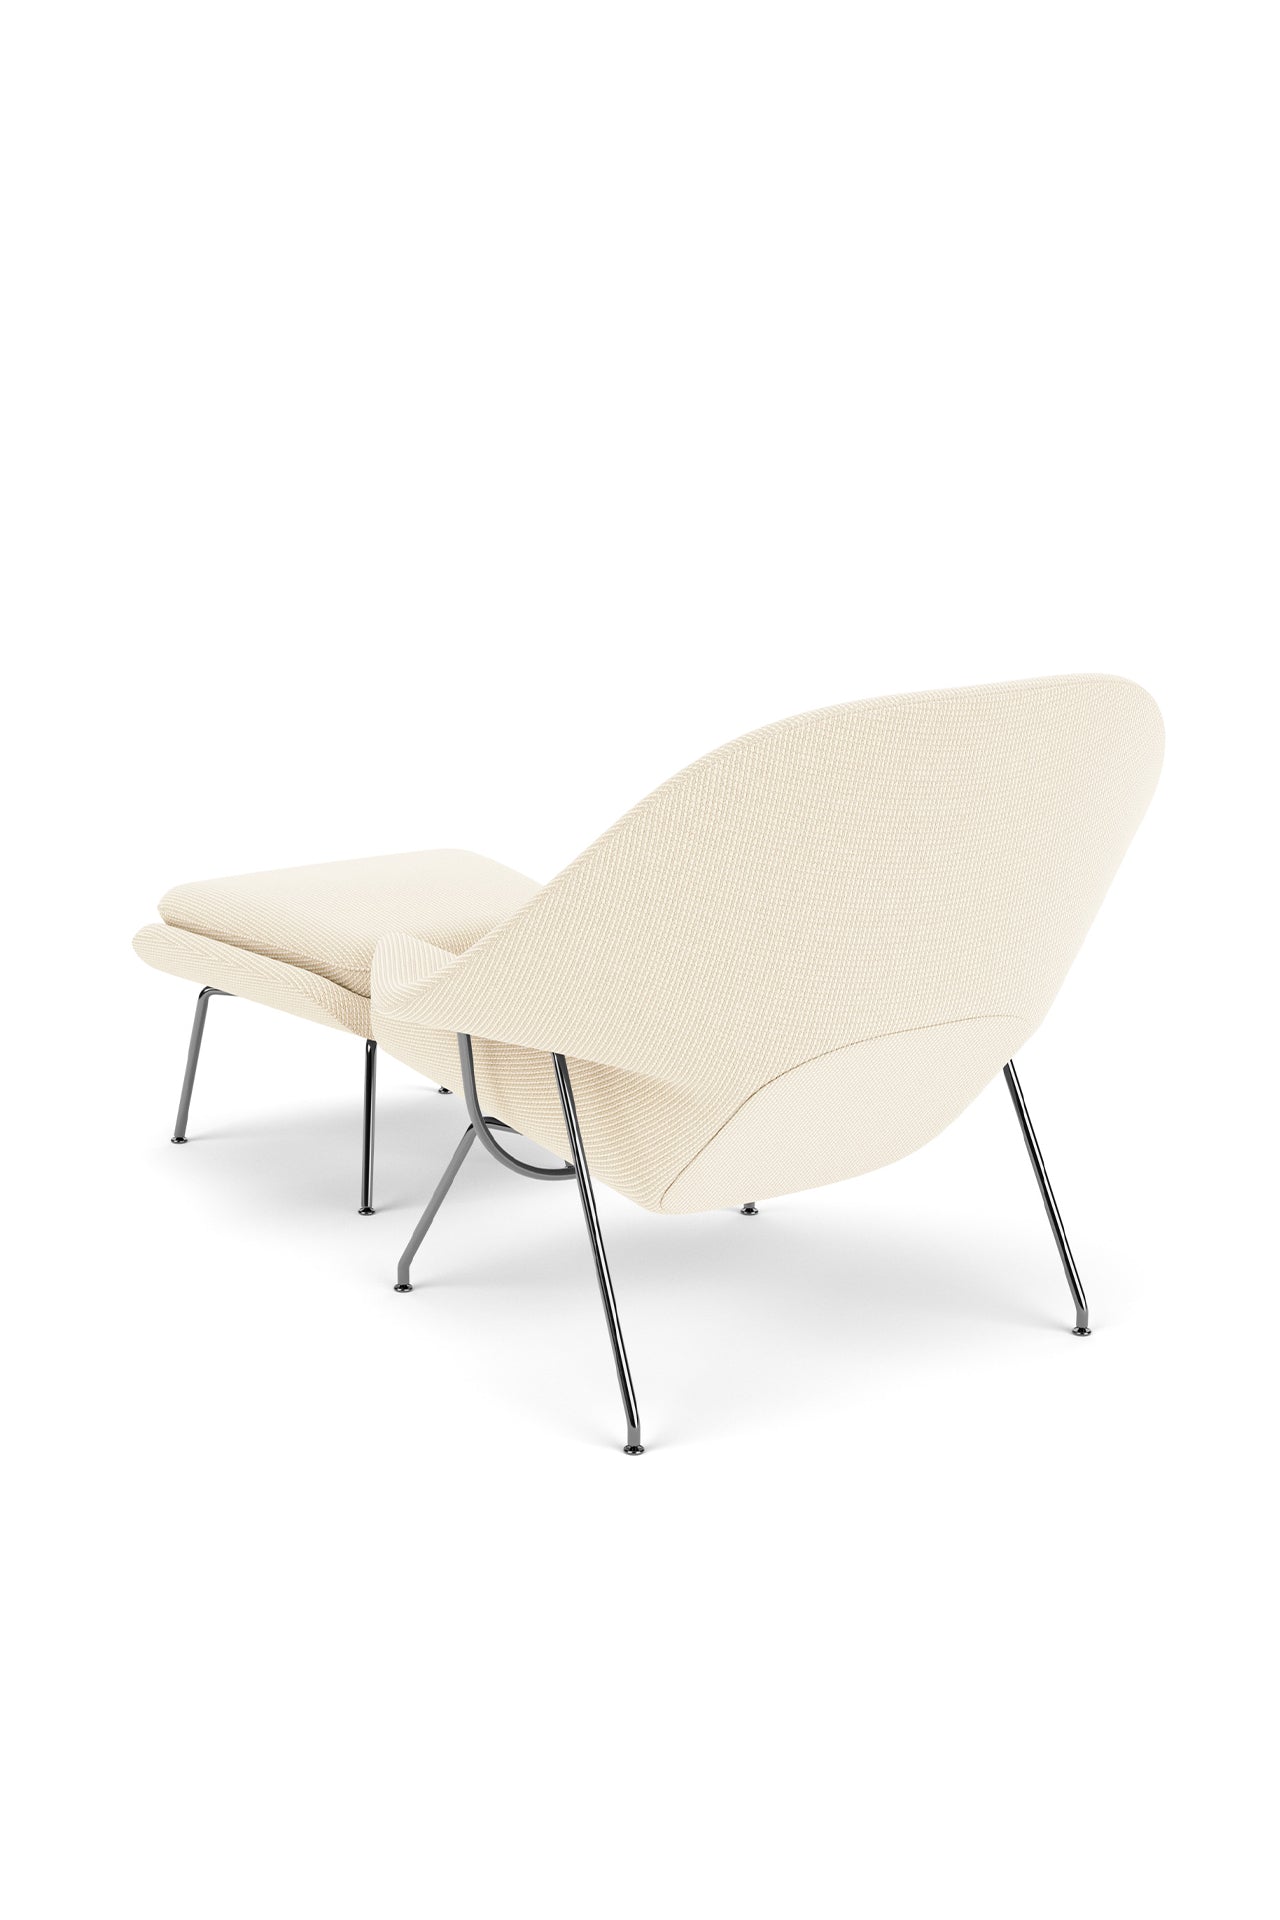 Knoll Womb Chair With Ottoman Designed By Eero Saarinen in Beige - Back Image (6606269907059)